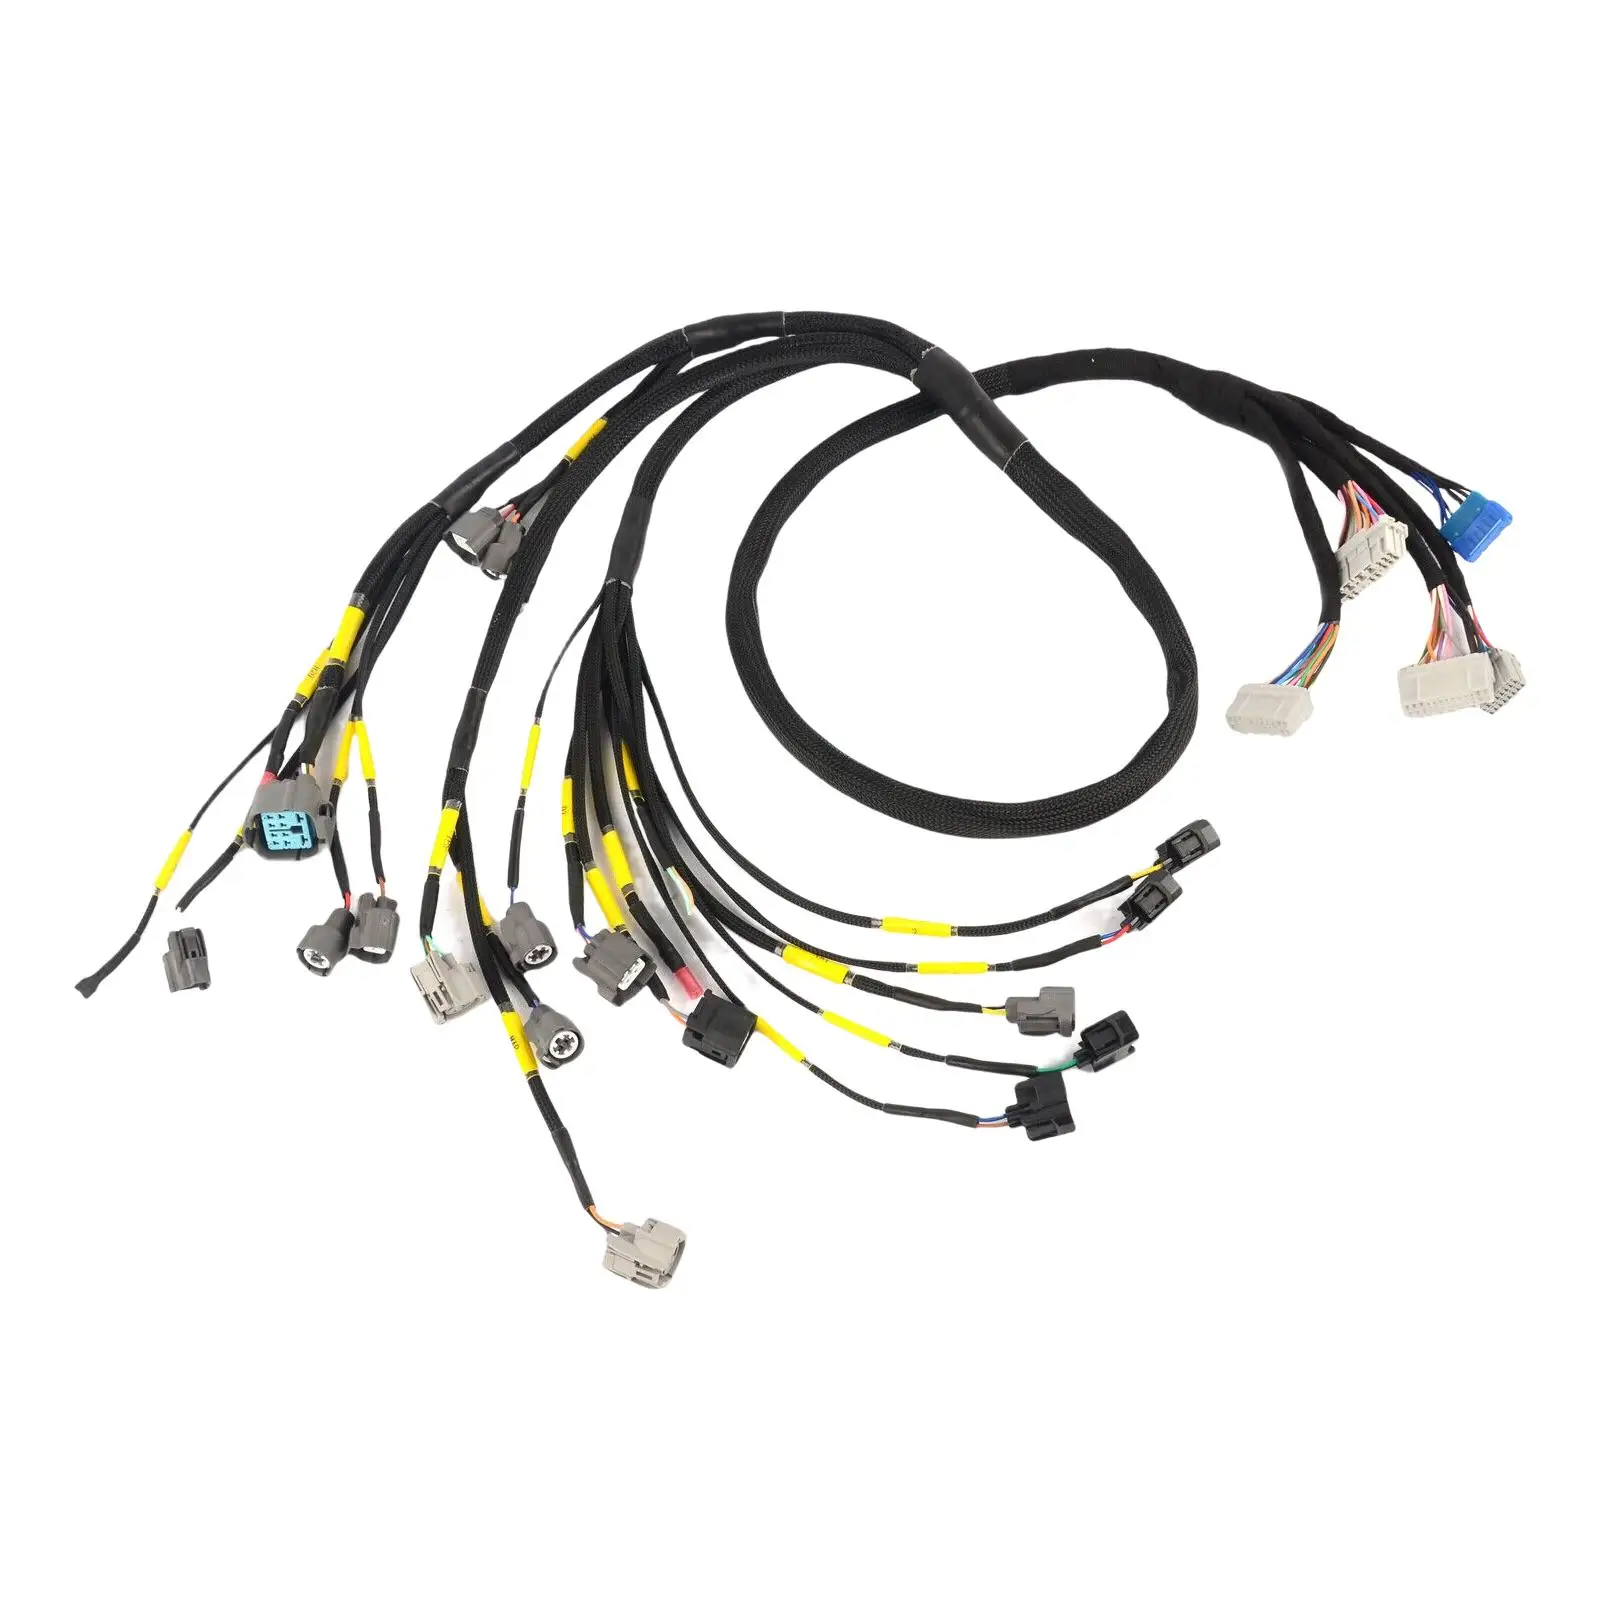 Tucked Engine Harness Cnch-Obd2-1 Replaces Accessories Automobile Professional